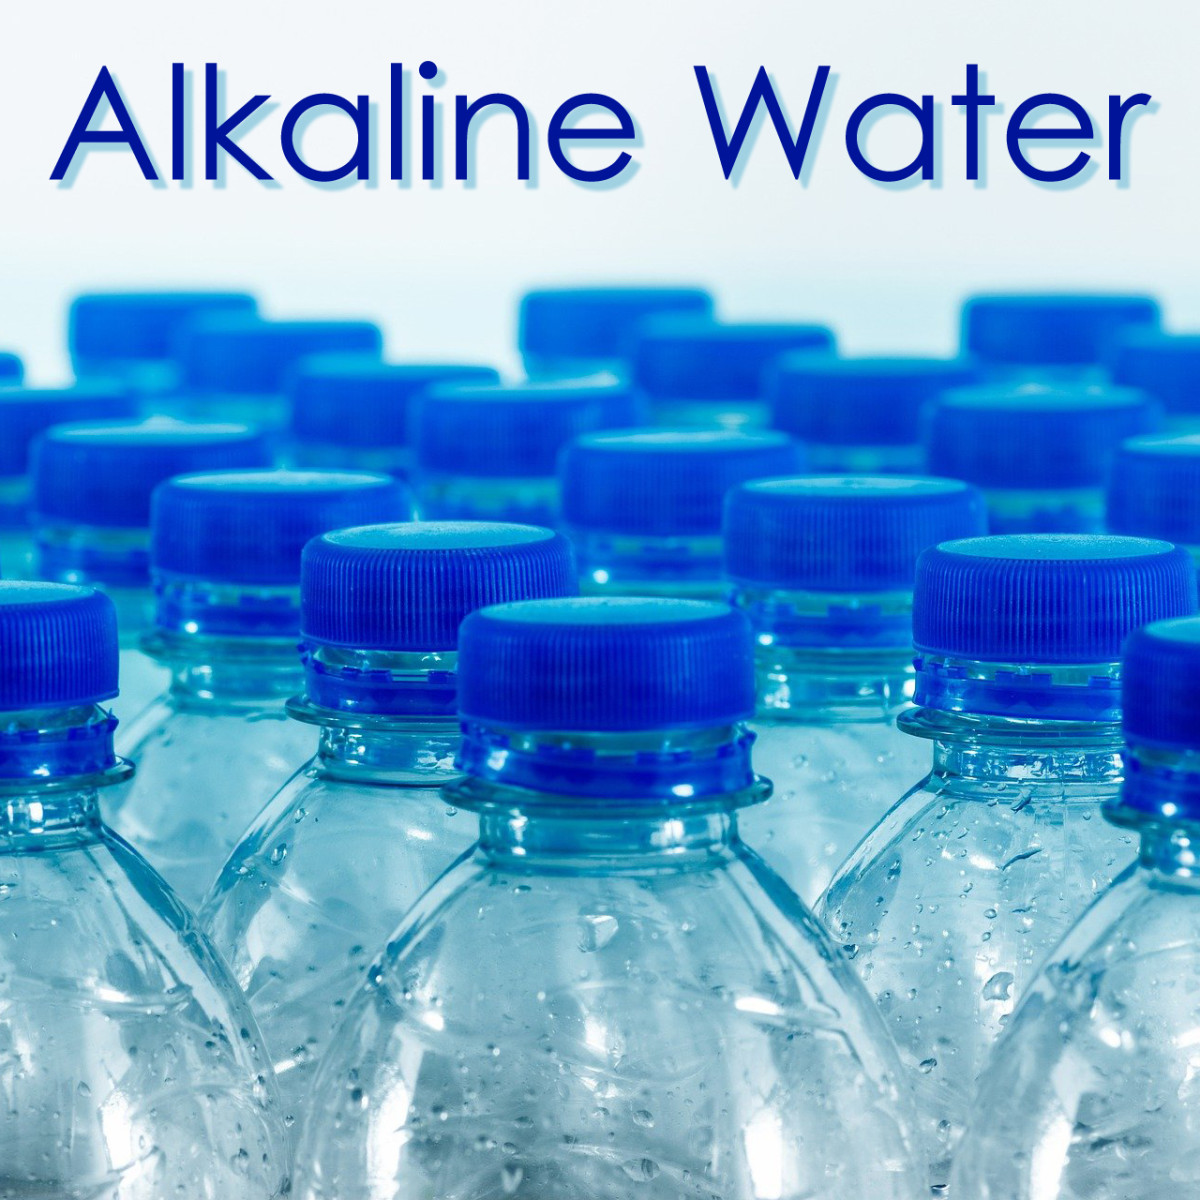 Alkaline Water: What Is It and Should You Drink It?